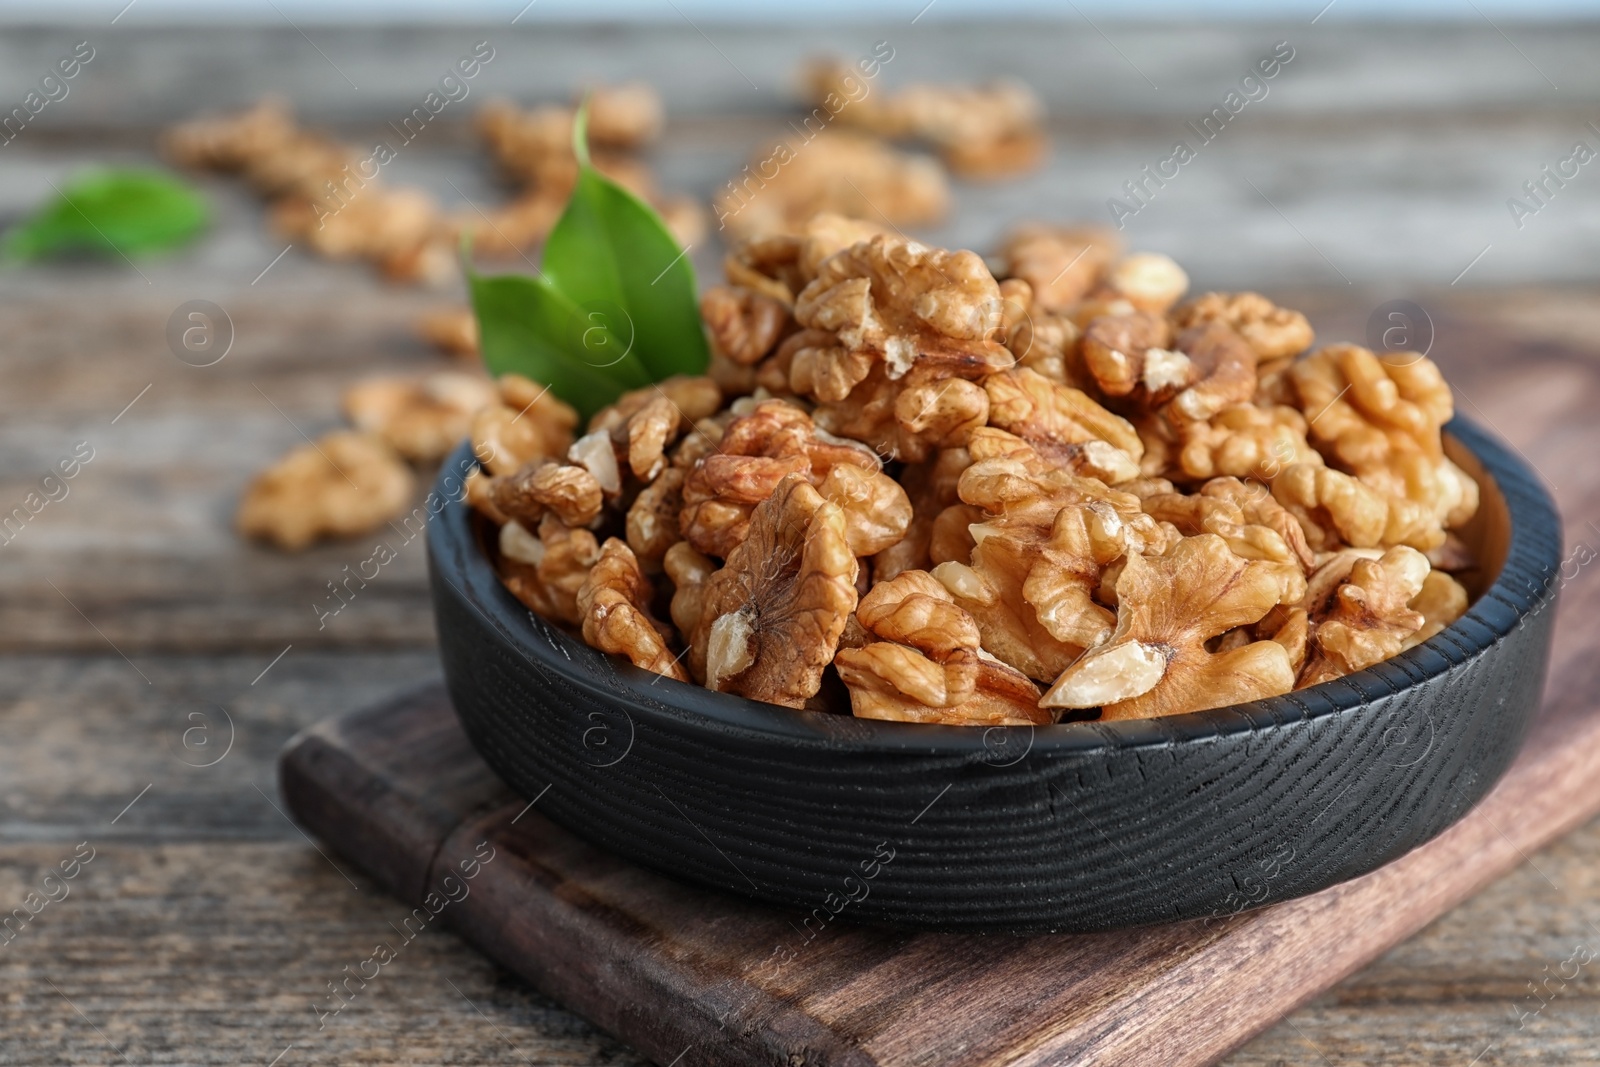 Photo of Plate with tasty walnuts on wooden table